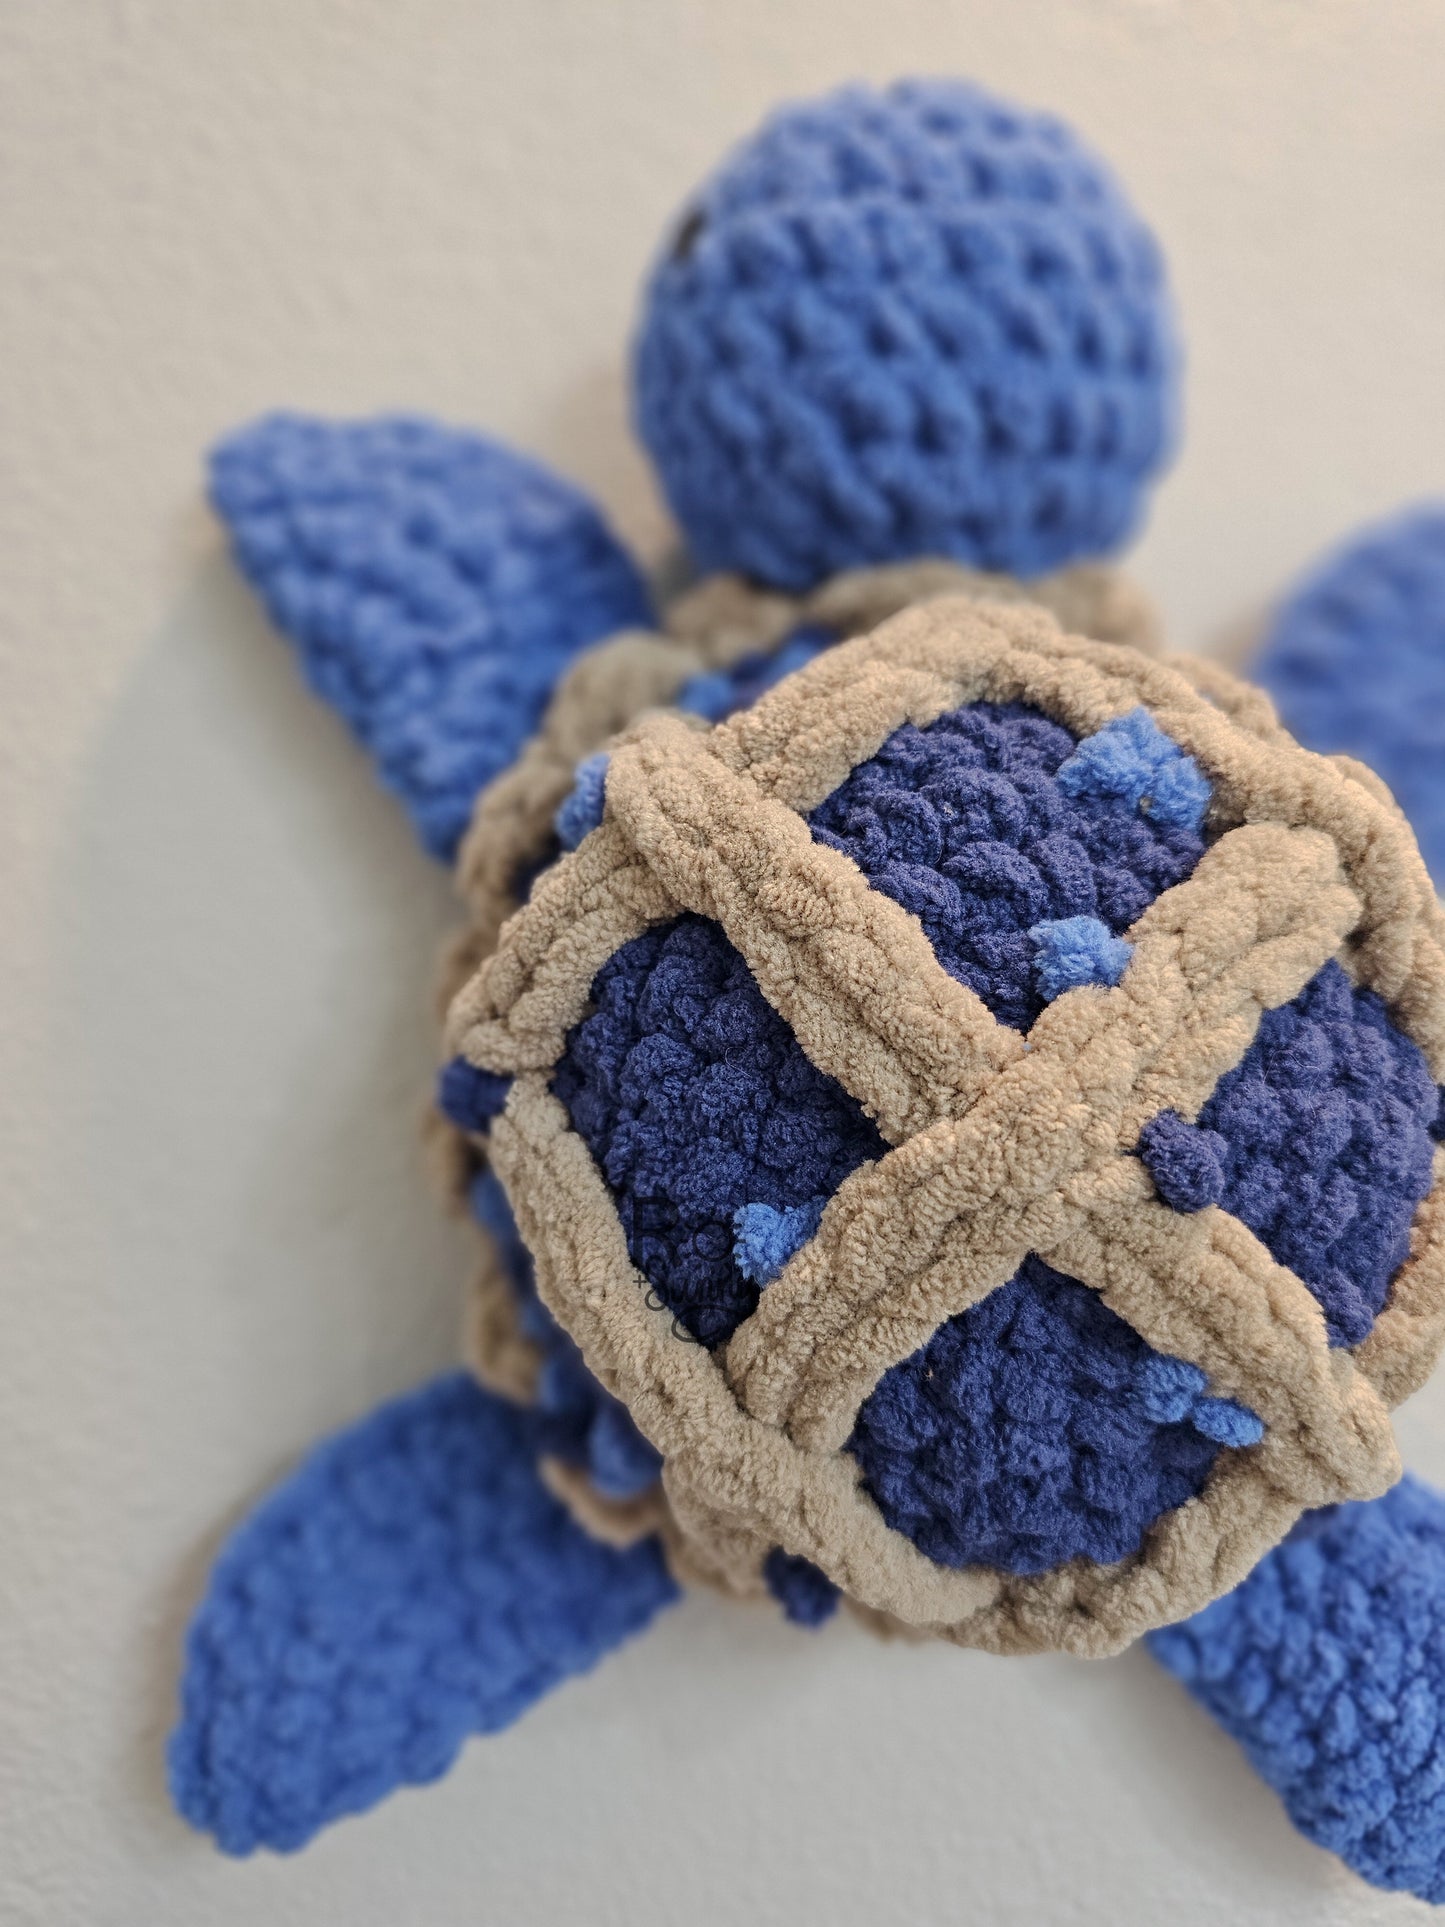 Blueberry Pie, Closeup - Crochet sea turtle with a blue body and shell that looks like a lattice crusted blueberry pie.  Little blueberries are embroidered on the pie shell to add texture. 